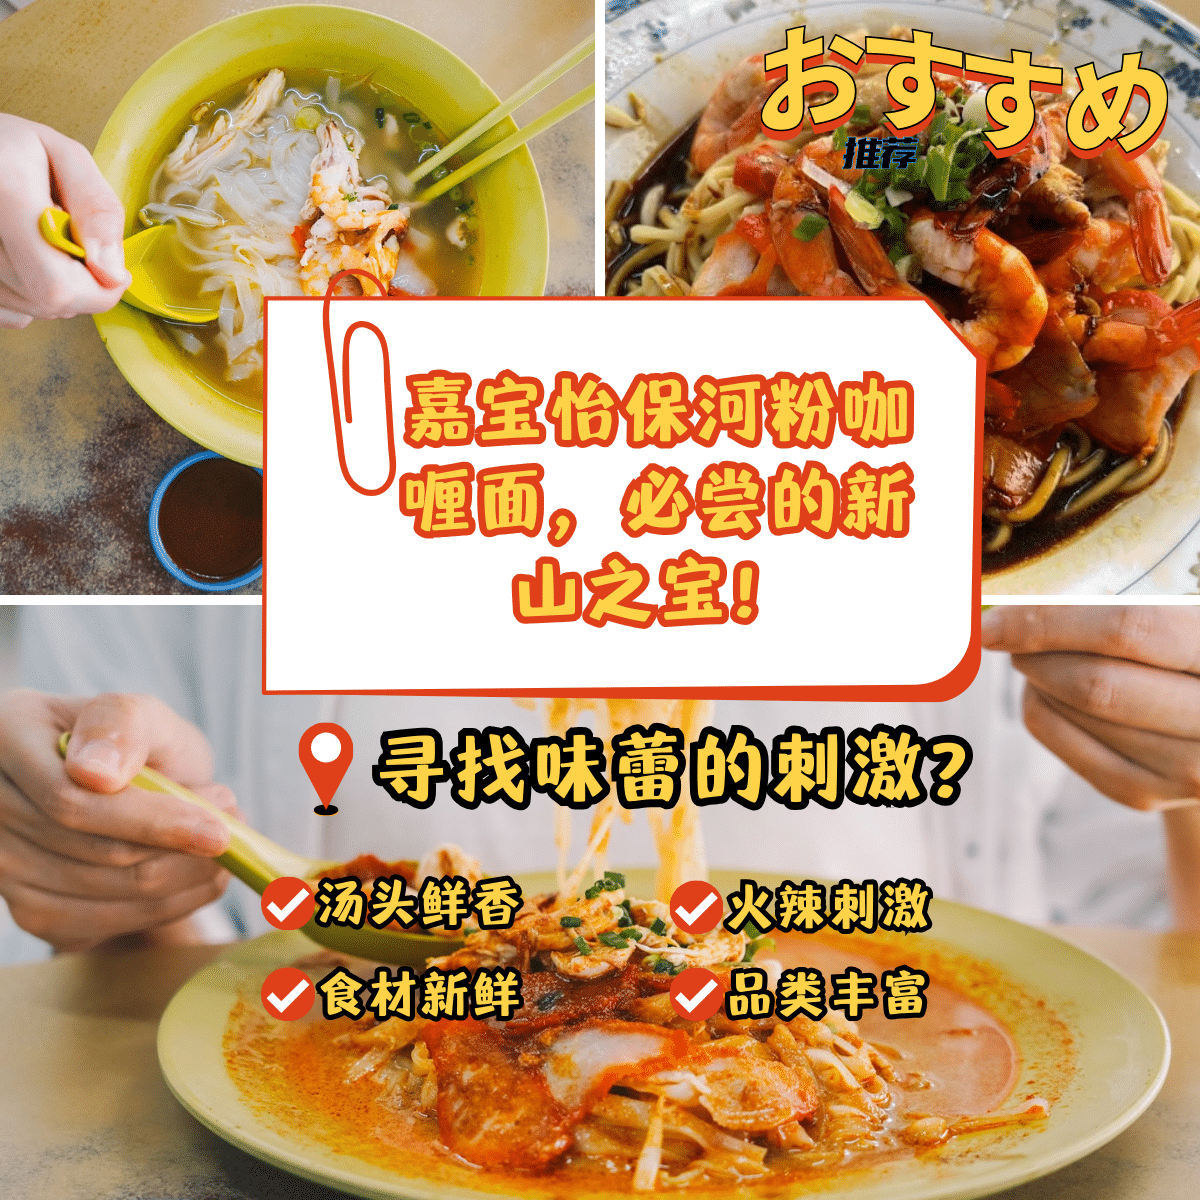 XL Curry Mee自选咖哩面 @ HJ KITCHEN 合记美食坊 menu and delivery in Puchong ...